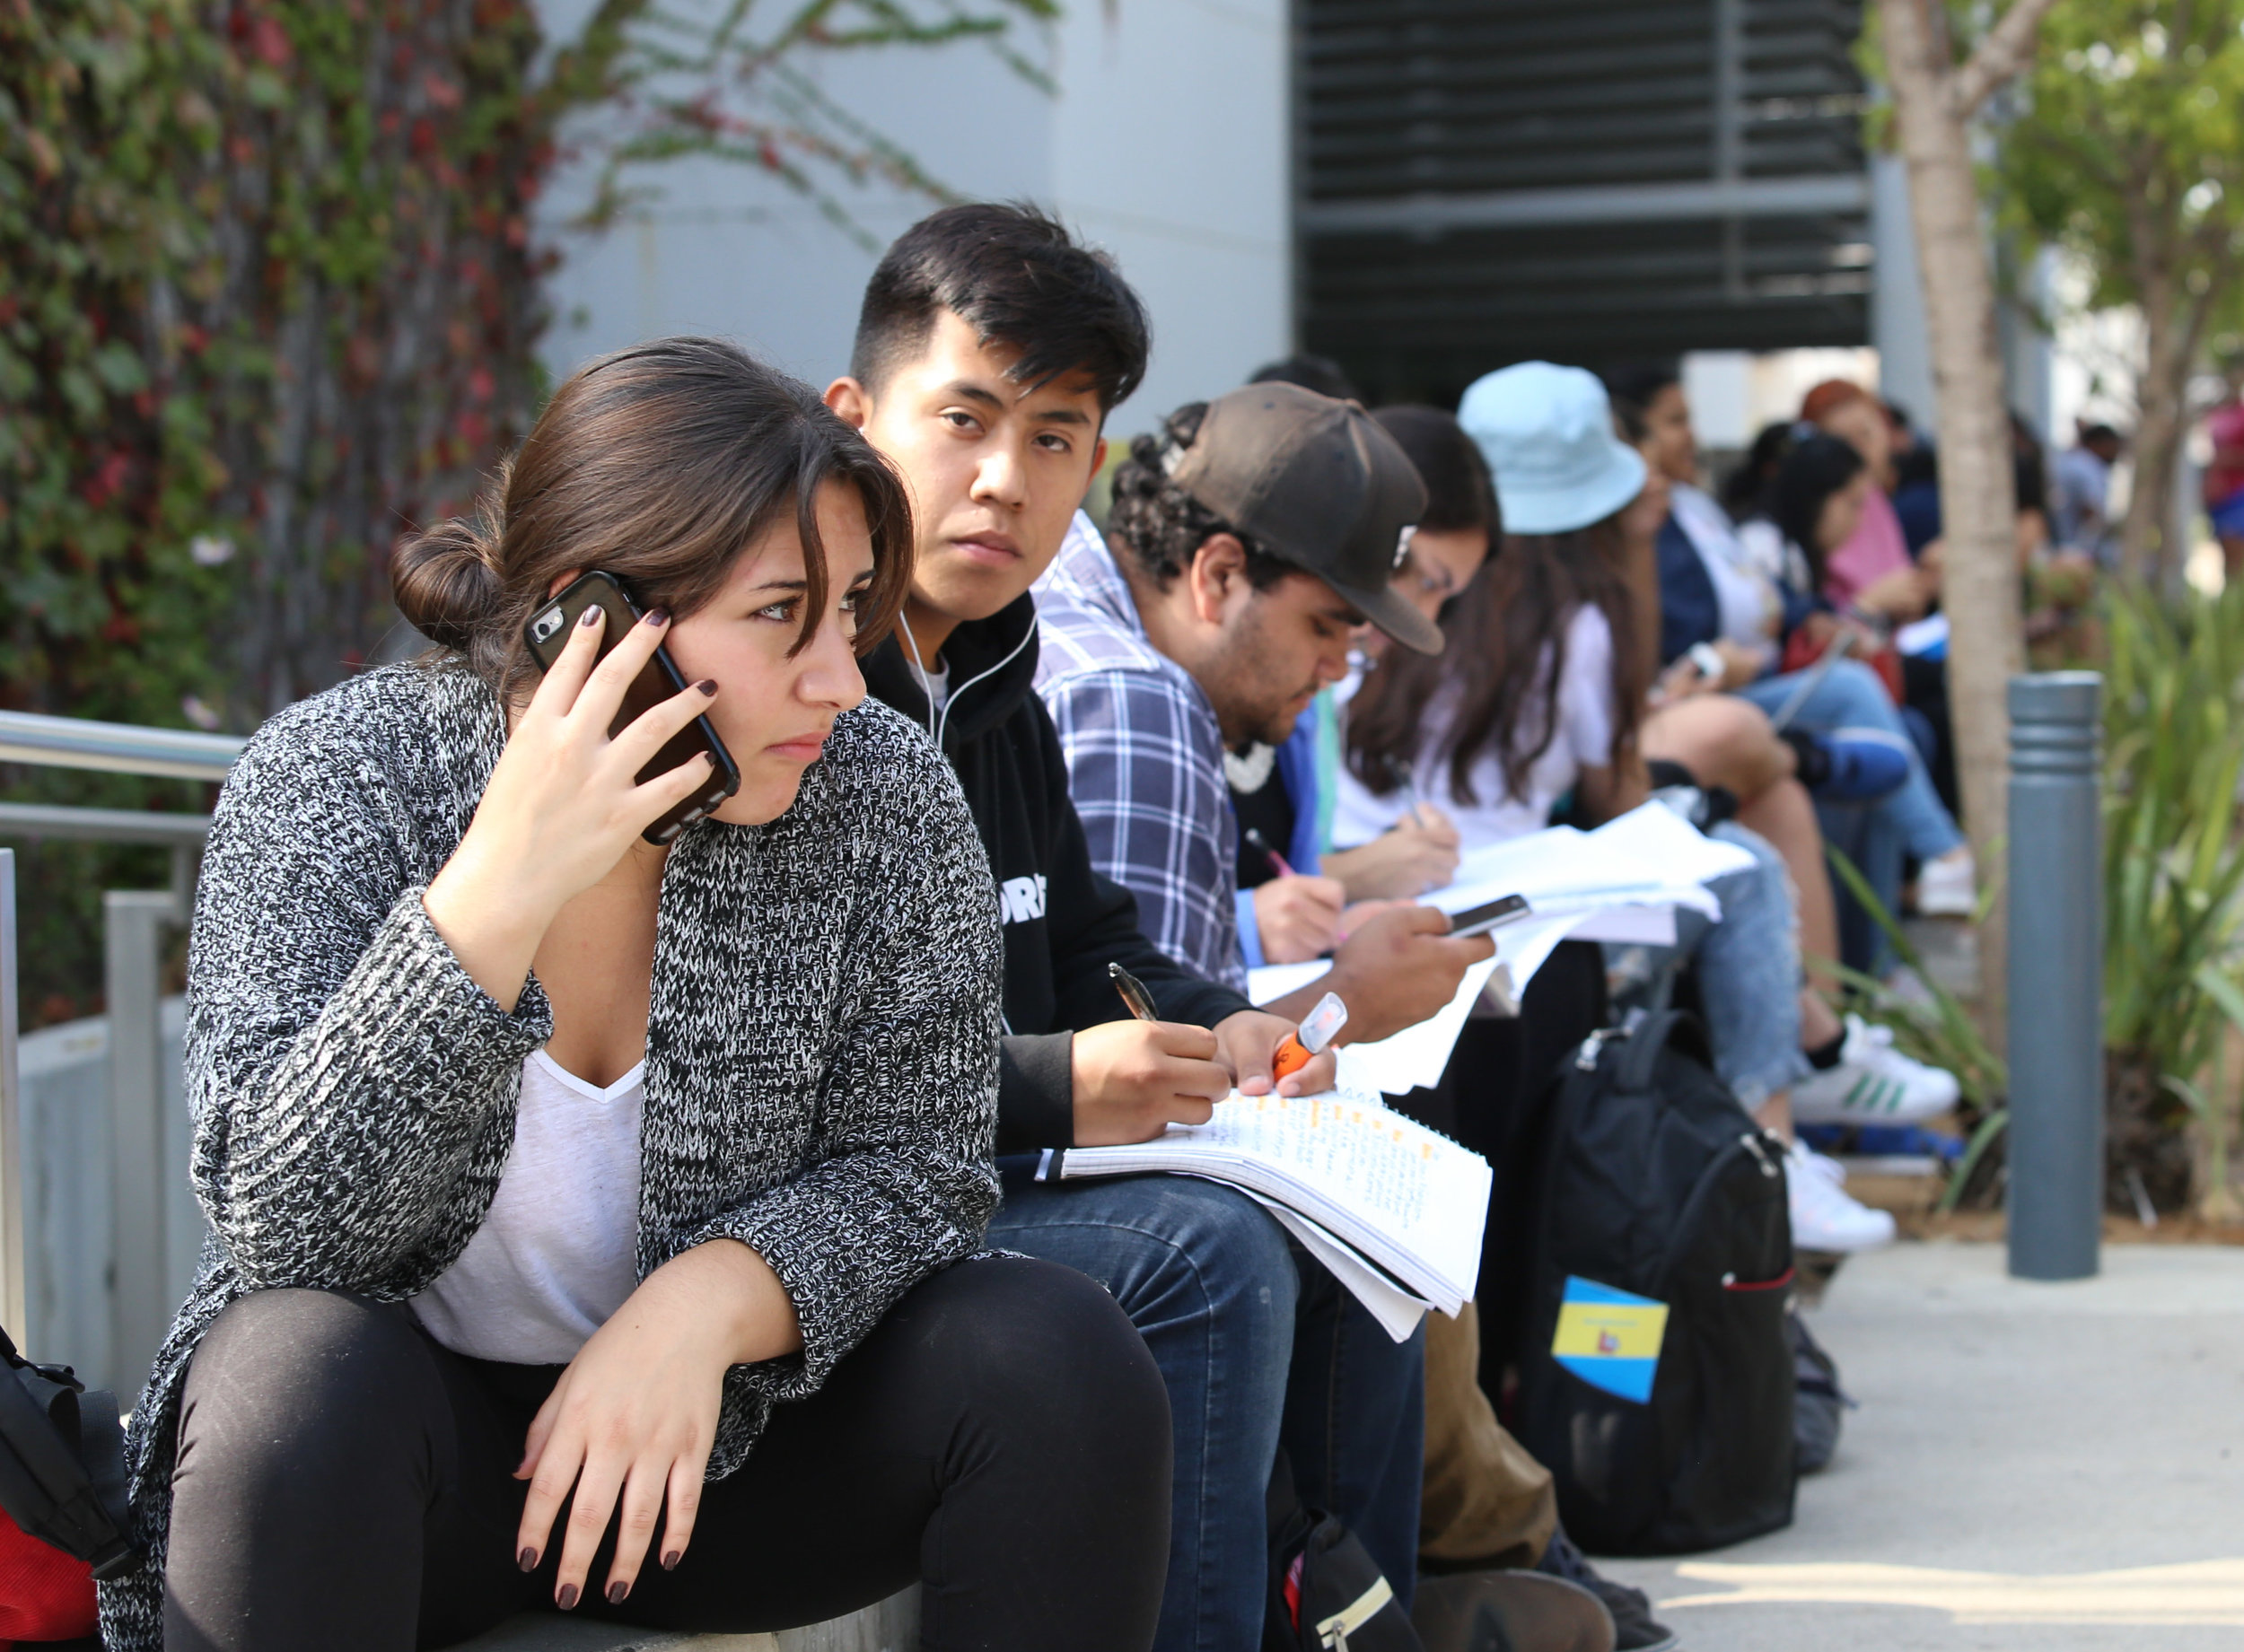  Students wait outside of Santa Monica College's Main Campus Library doing school work after being evacuated for the Great California Shakedown drill in Santa Monica, Calif on Thursday, October 19th 2017. (Photo by: Thane Fernandes) 